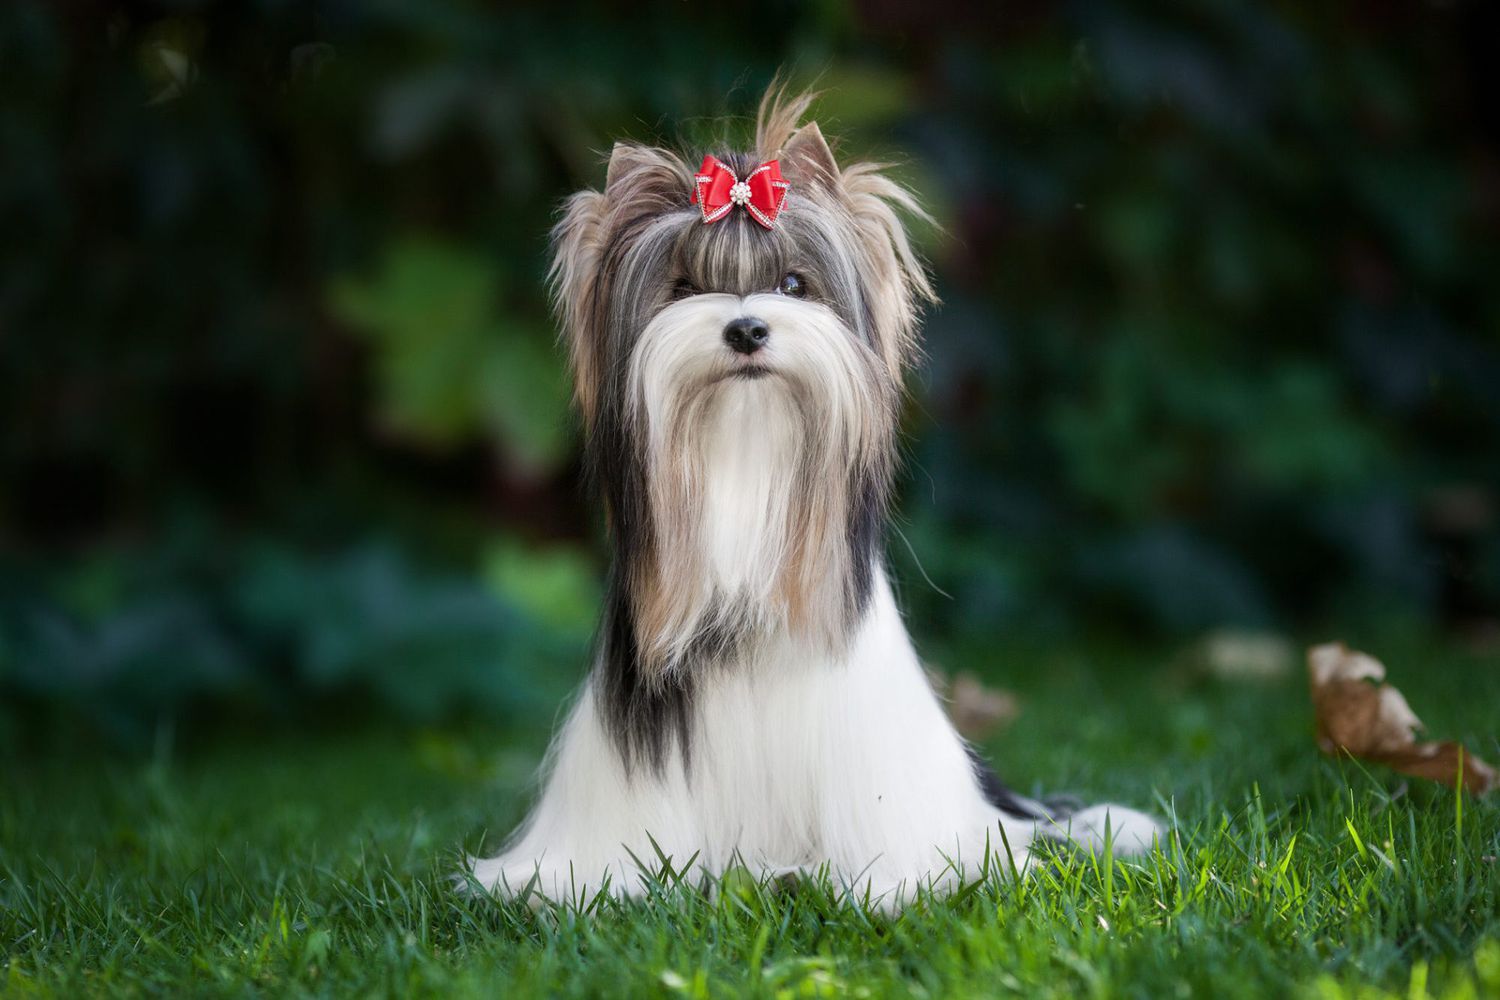 Biewer Terrier sitting in grass wearing a red bow